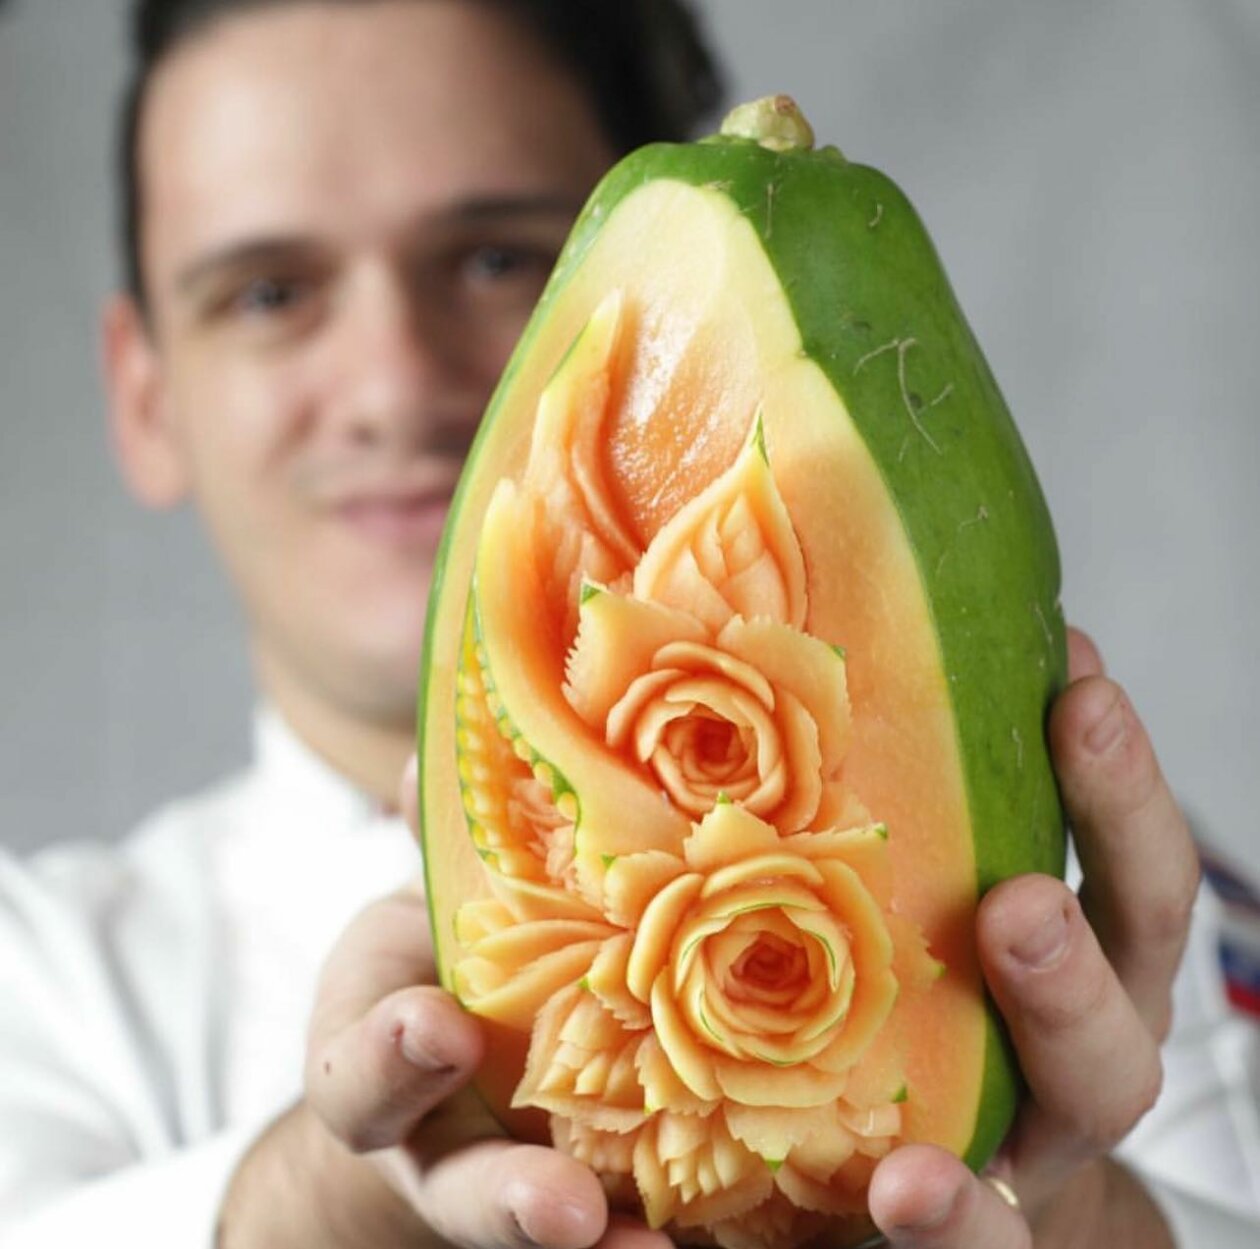 Superb Fruit And Vegetable Carvings By Daniele Barresi 23